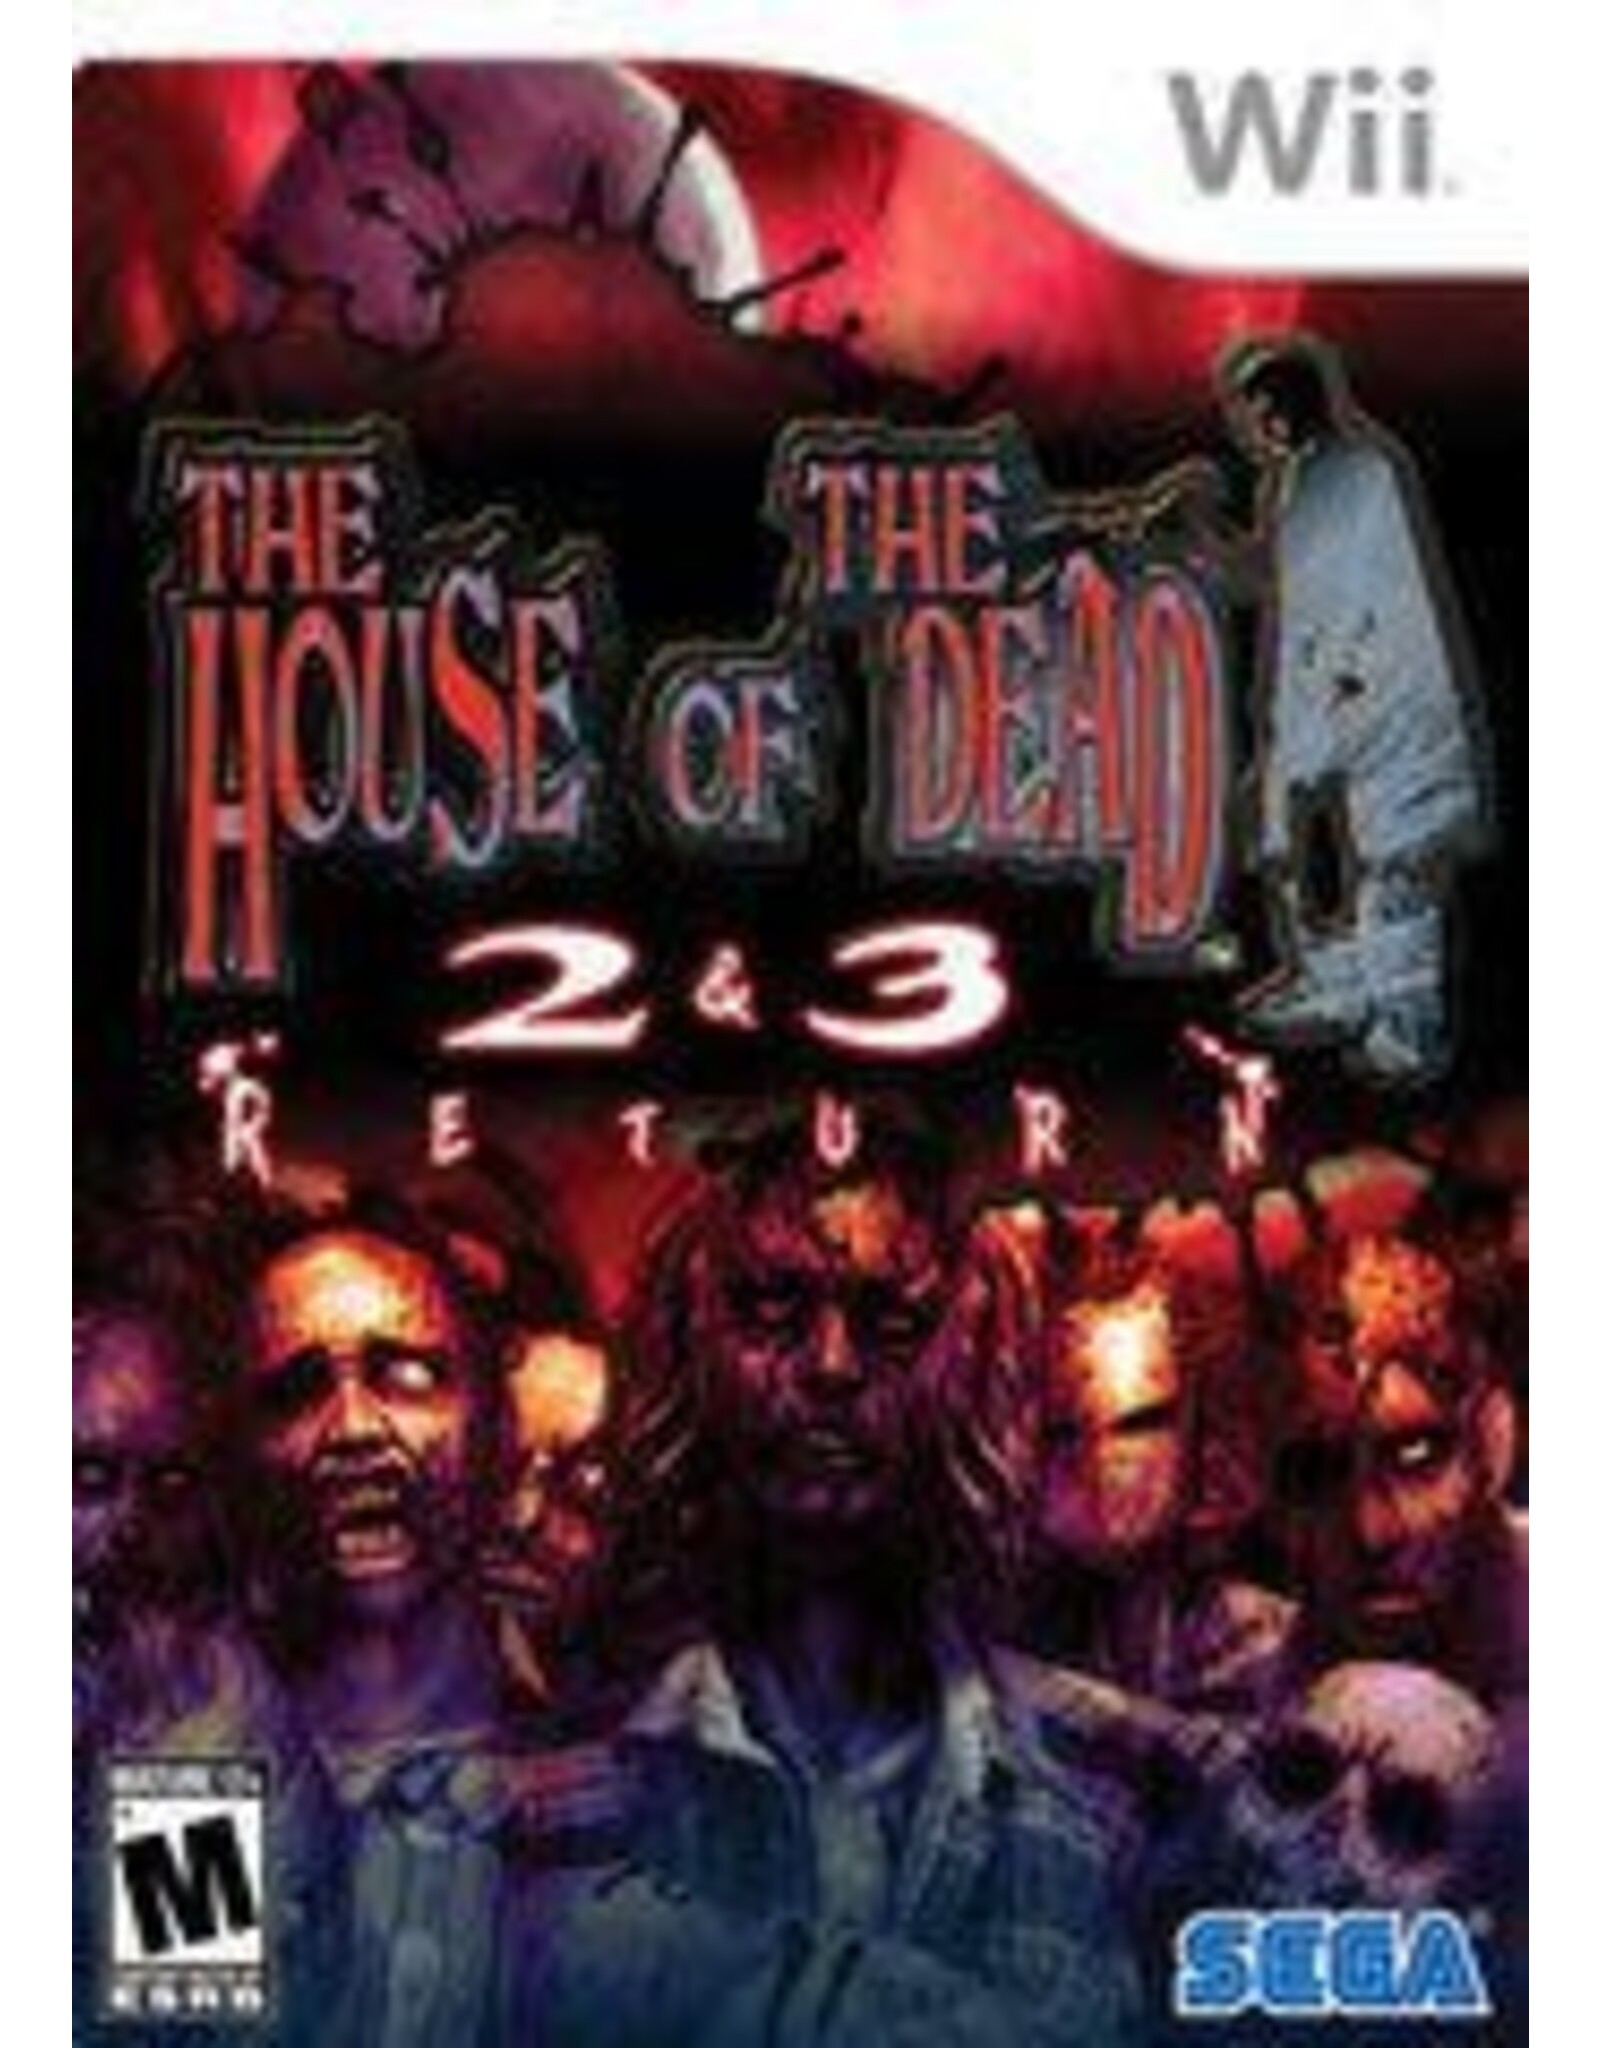 Wii House of the Dead 2 & 3 Return, The (Brand New)